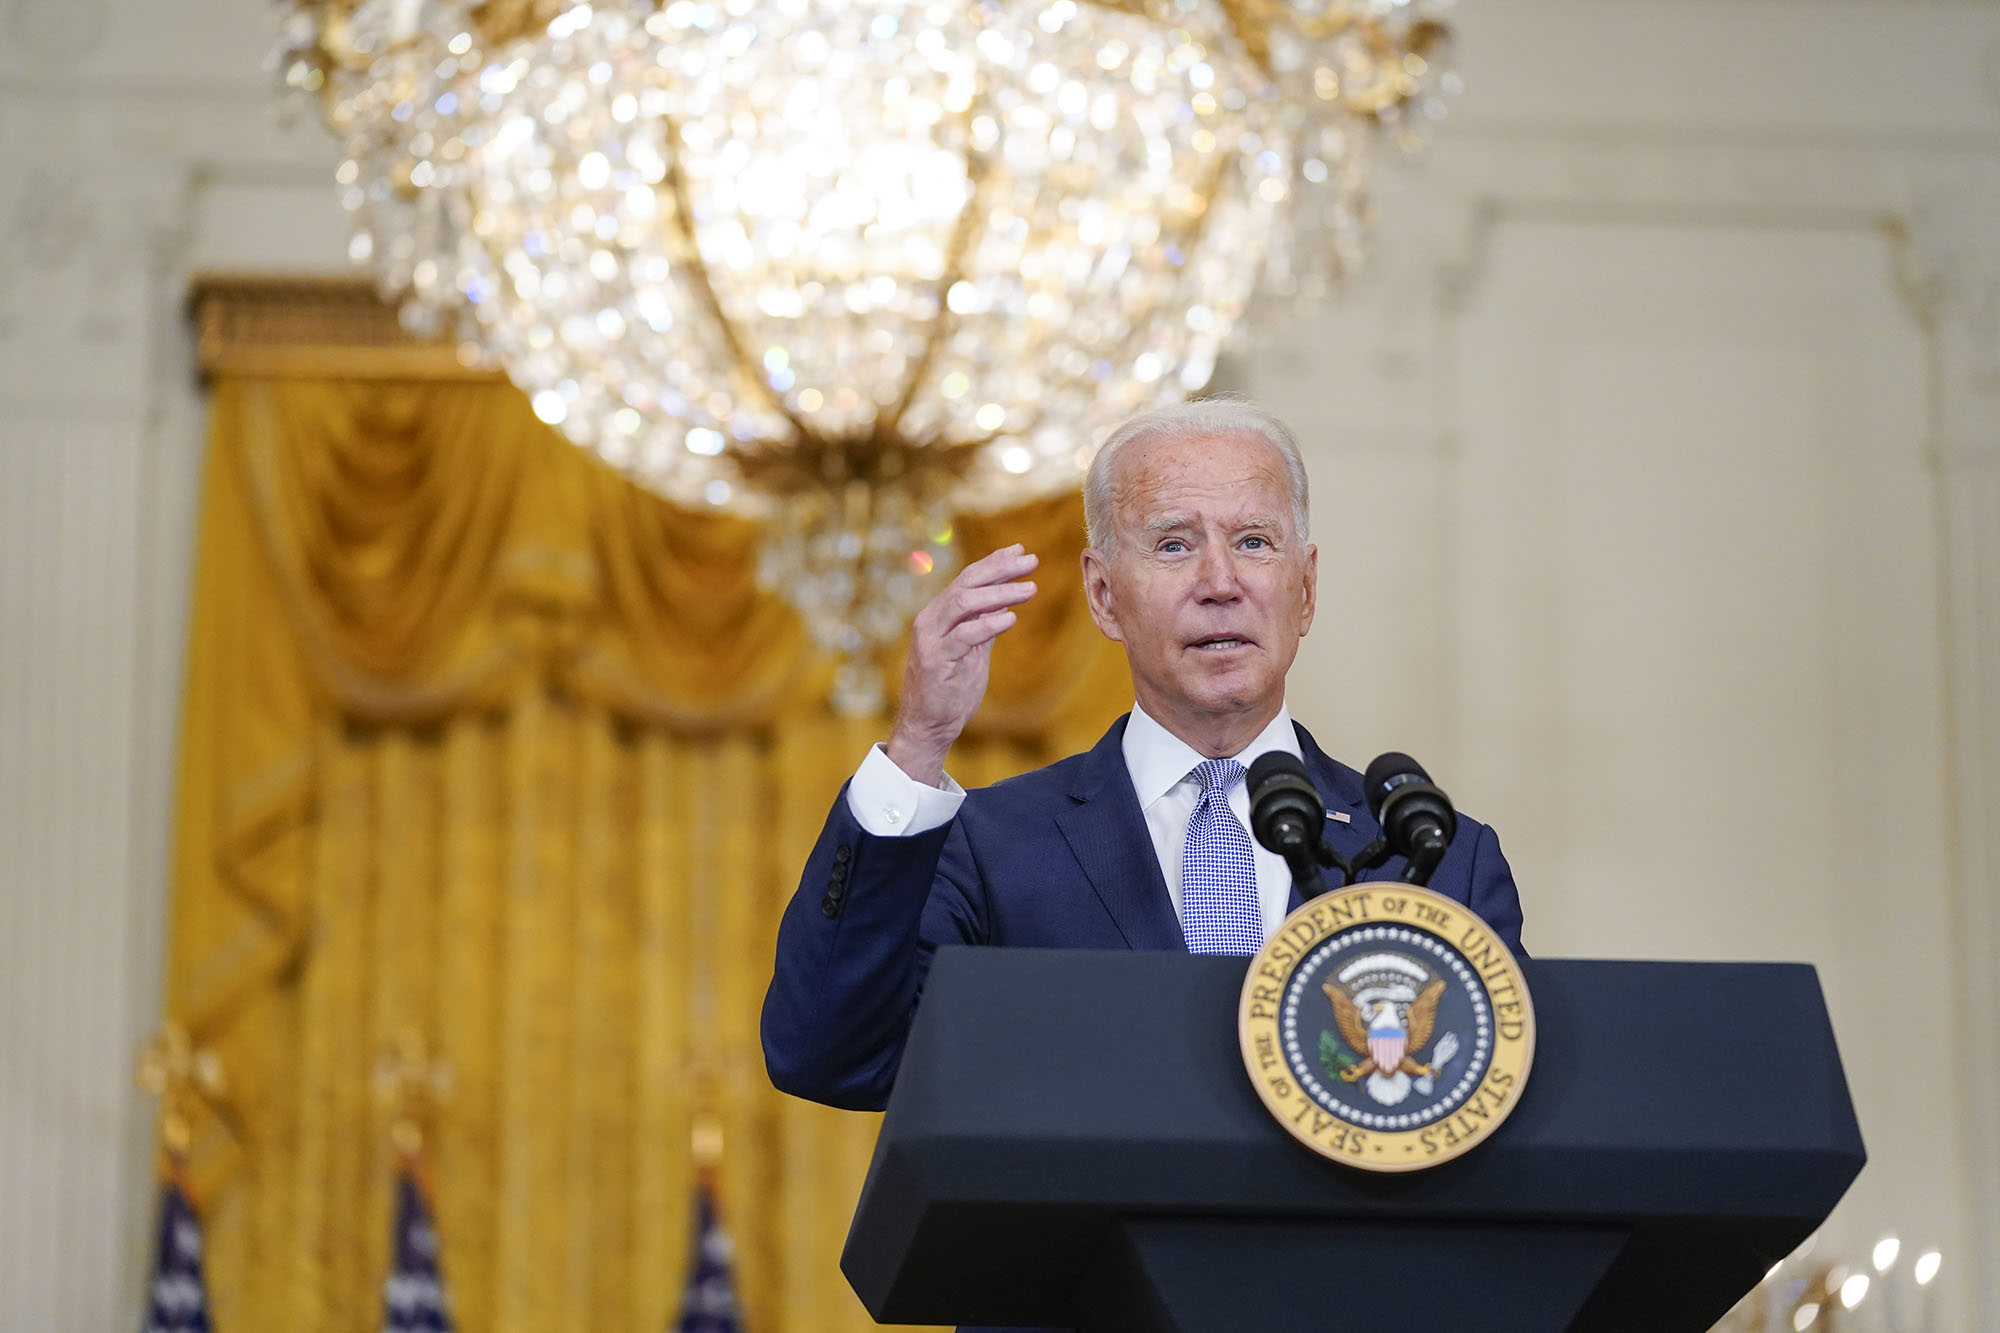 PHOTO: President Joe Biden speaks about prescription drug prices and his "Build Back Better" agenda from the East Room of the White House, Aug. 12, 2021.